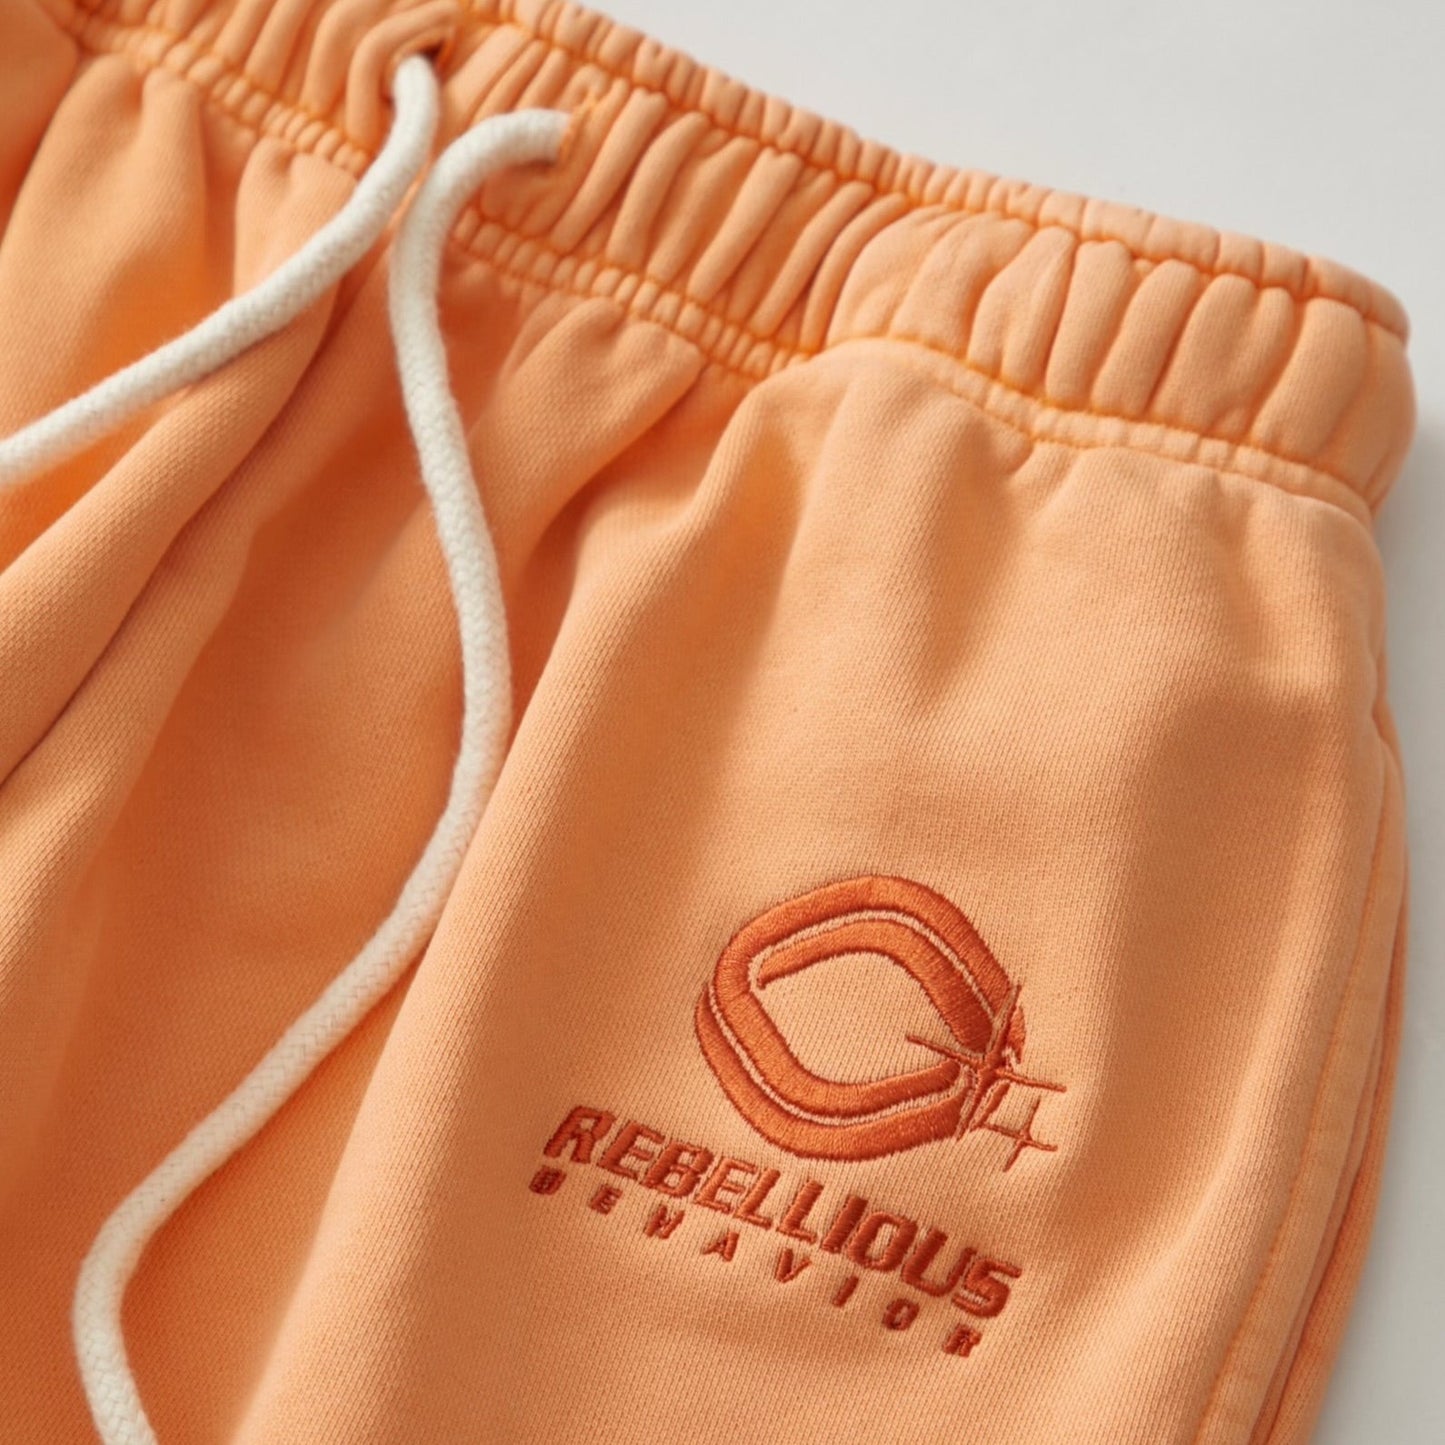 RBLS EMBROIDERY SP LOGO SWEAT PANTS